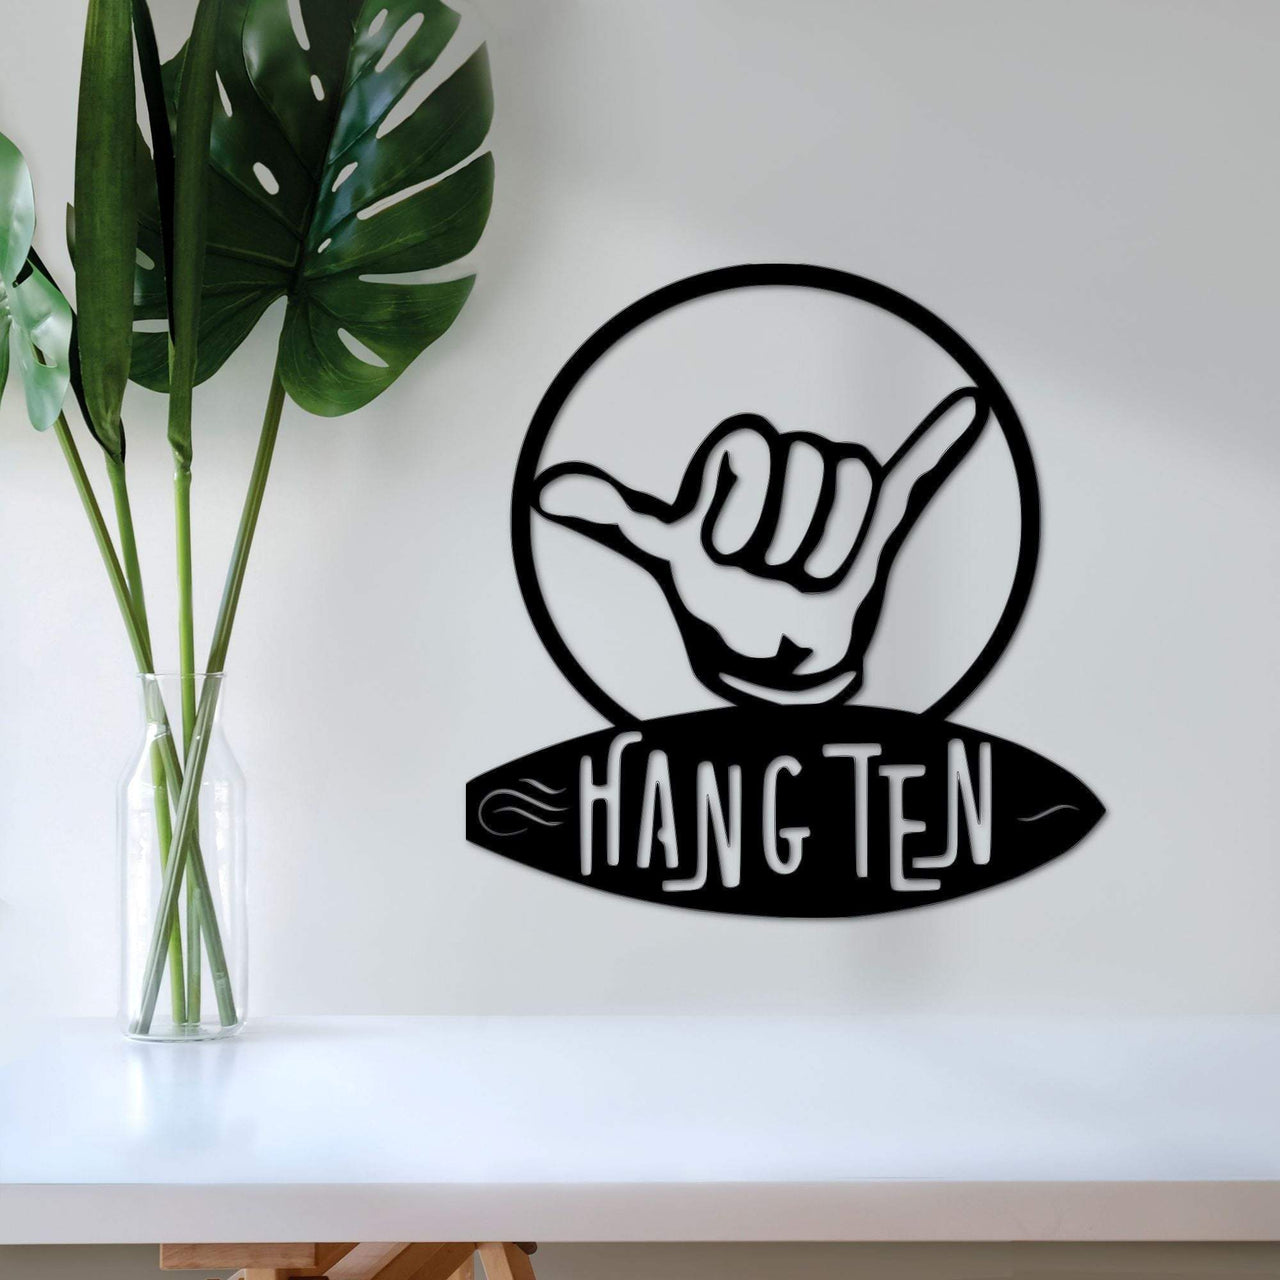 Hang Ten Sign | Surf Art Metal Wall Art | Surfing Decor | Gifts for Surfer | Hawaiian Decor | Ocean Gift for Him or Her